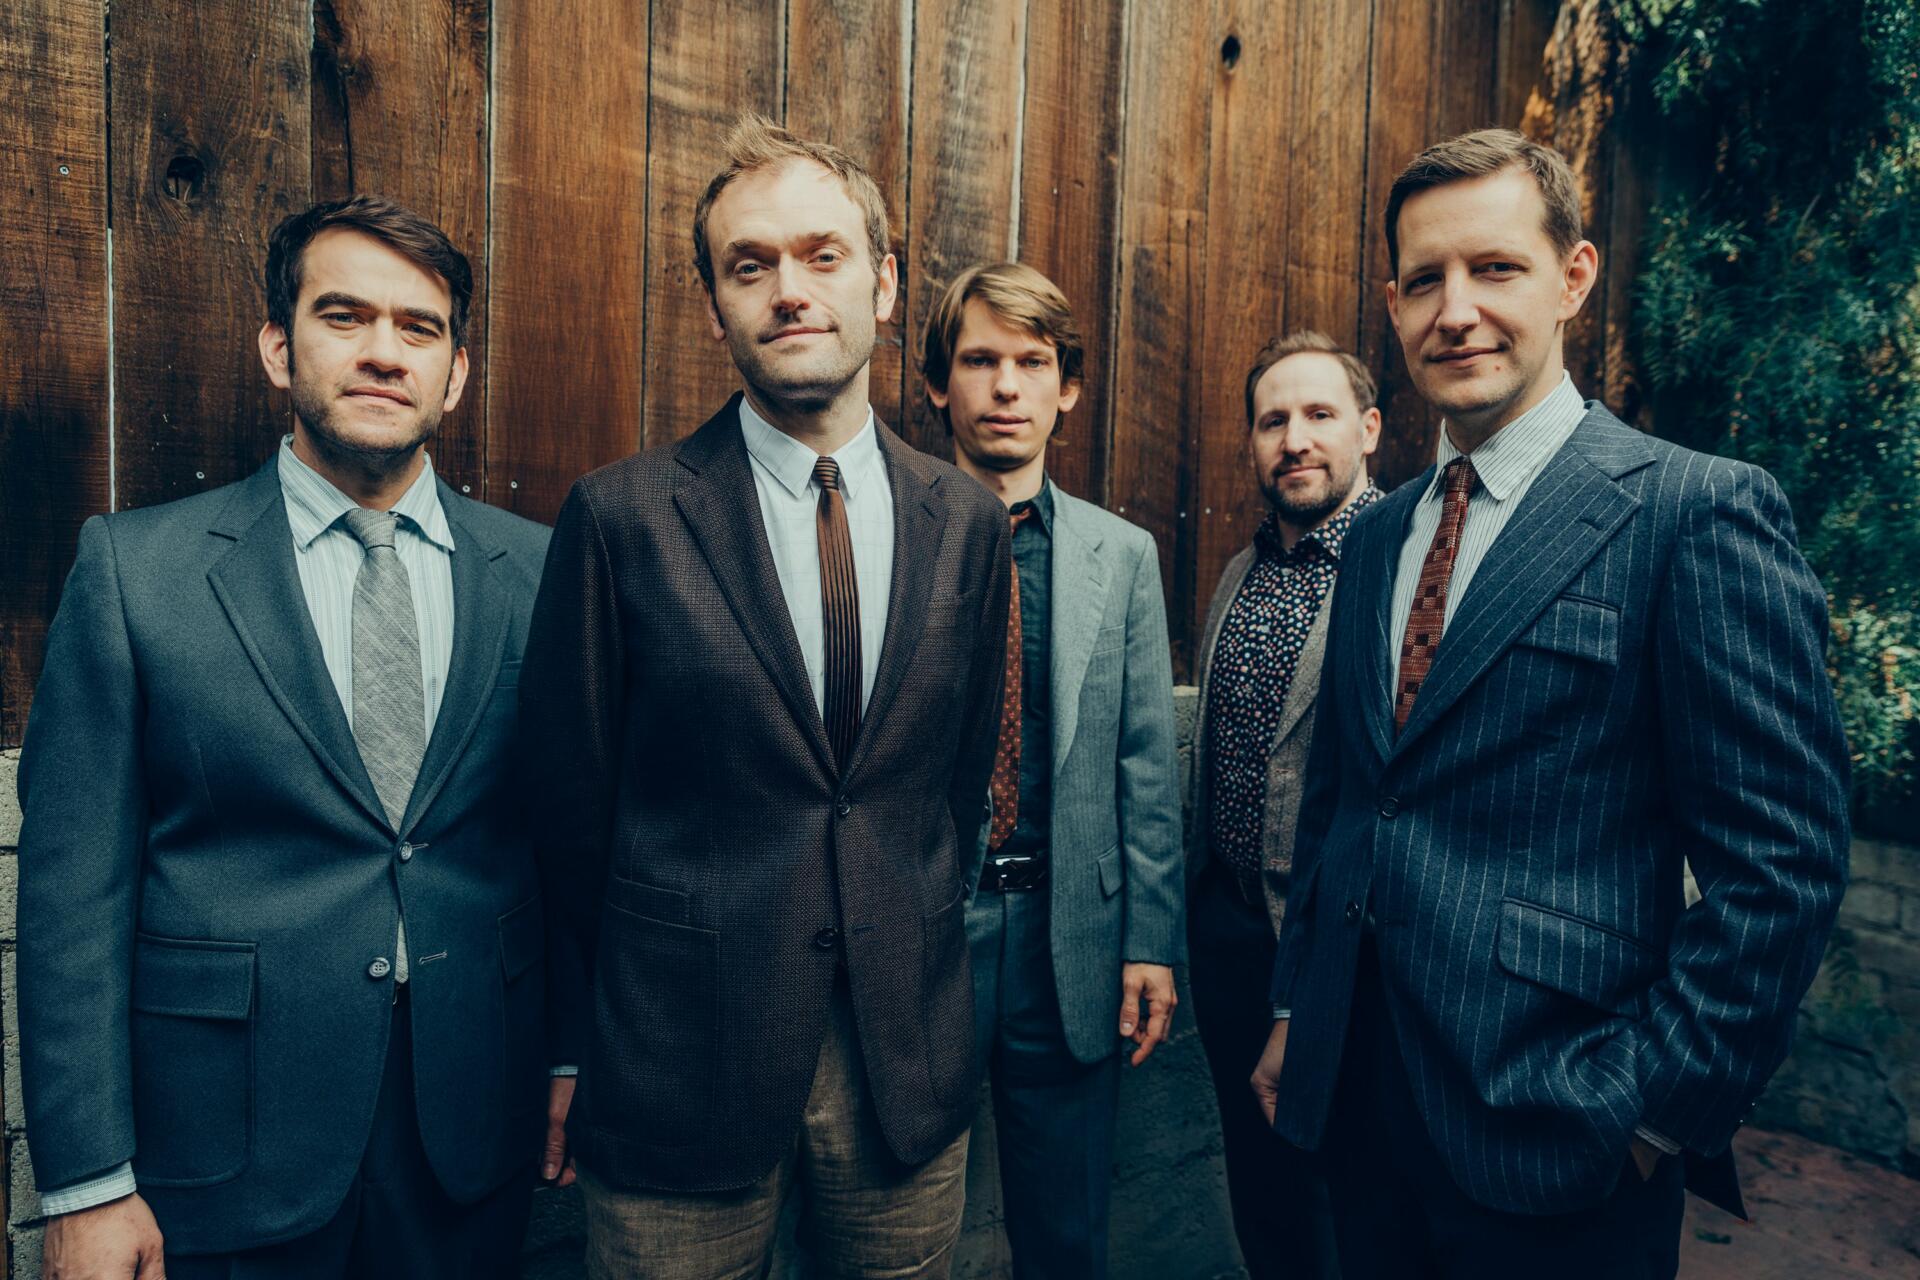 PunchBrothers